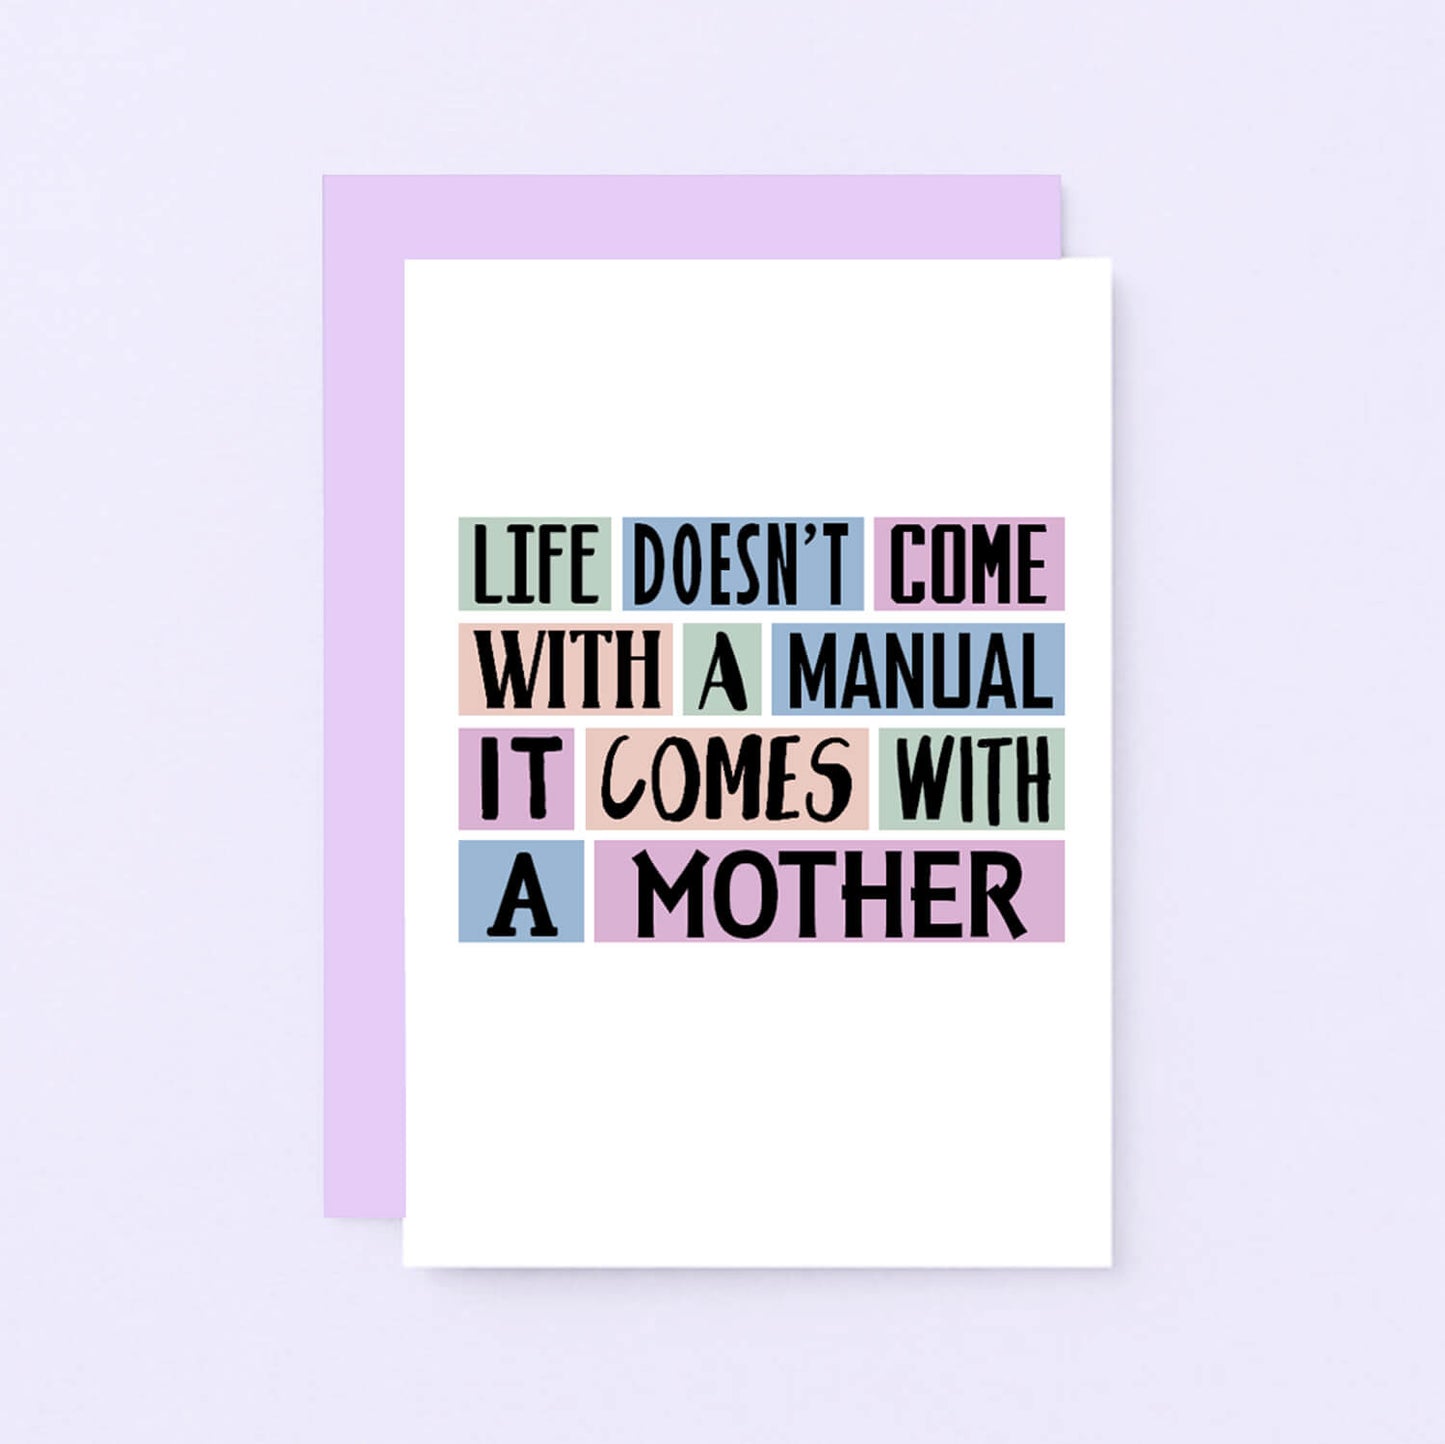 Mum Card by SixElevenCreations. Reads Life doesn't come with a manual. It comes with a mother. Product Code SE0147A6